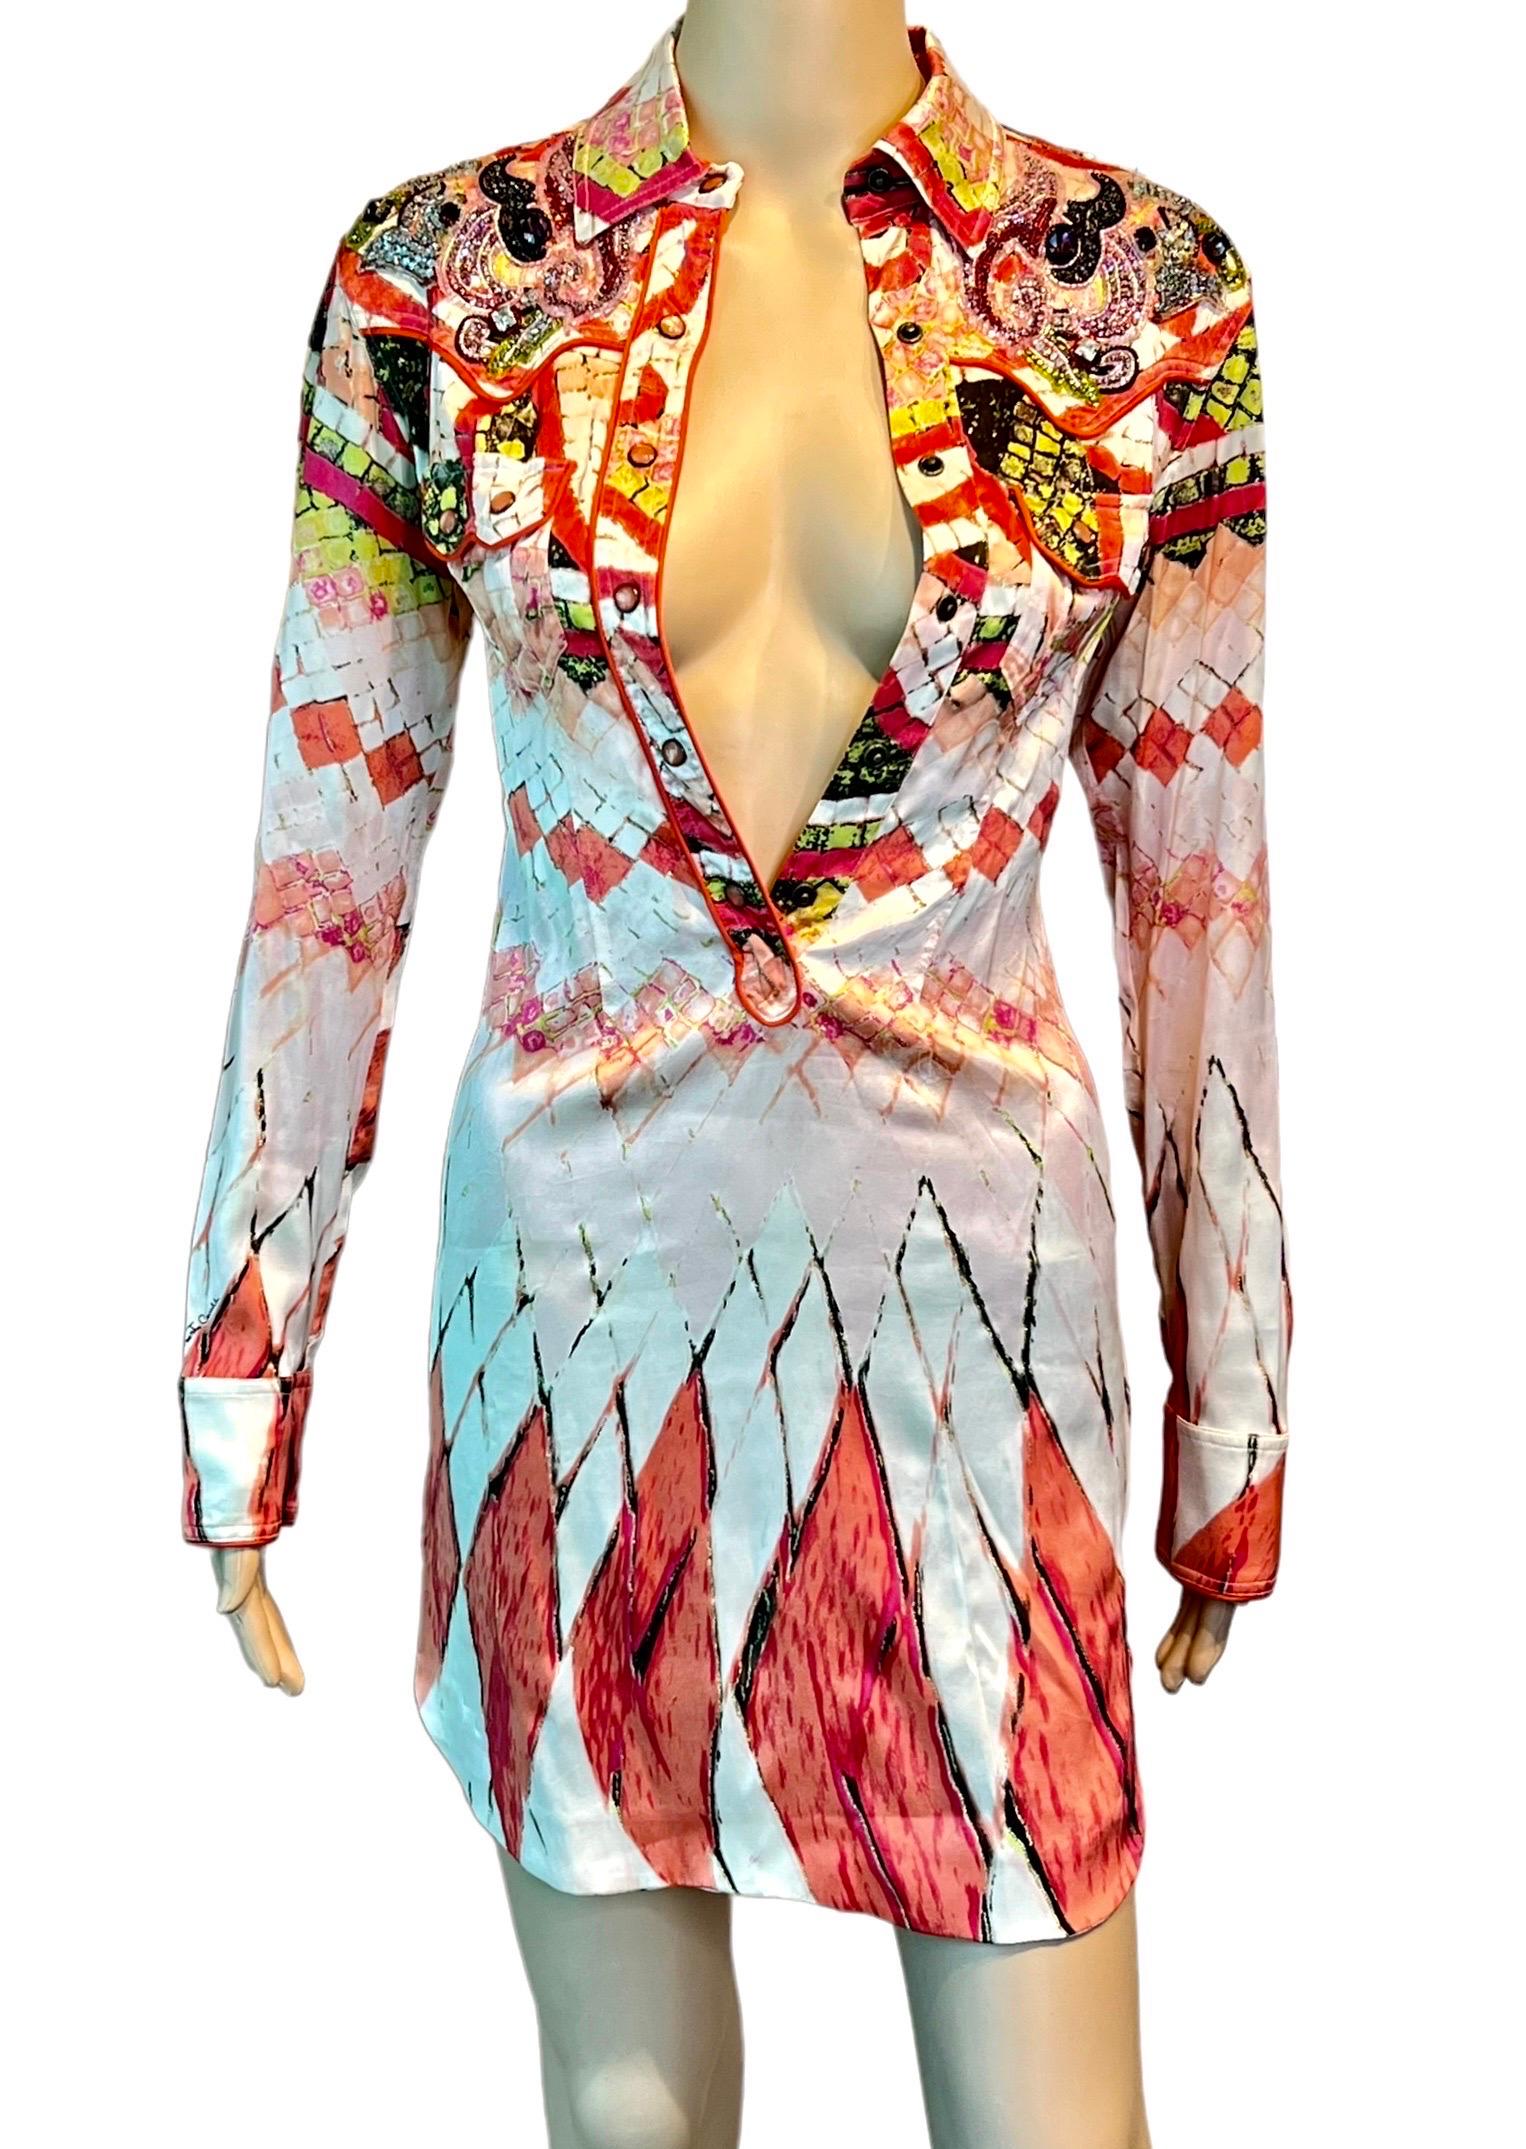 Roberto Cavalli S/S 2004 Runway Crystal Embellished Plunging Neckline Button Up Silk Mini Shirt Dress Size XS

Look 68 from the Spring 2004 Collection.
